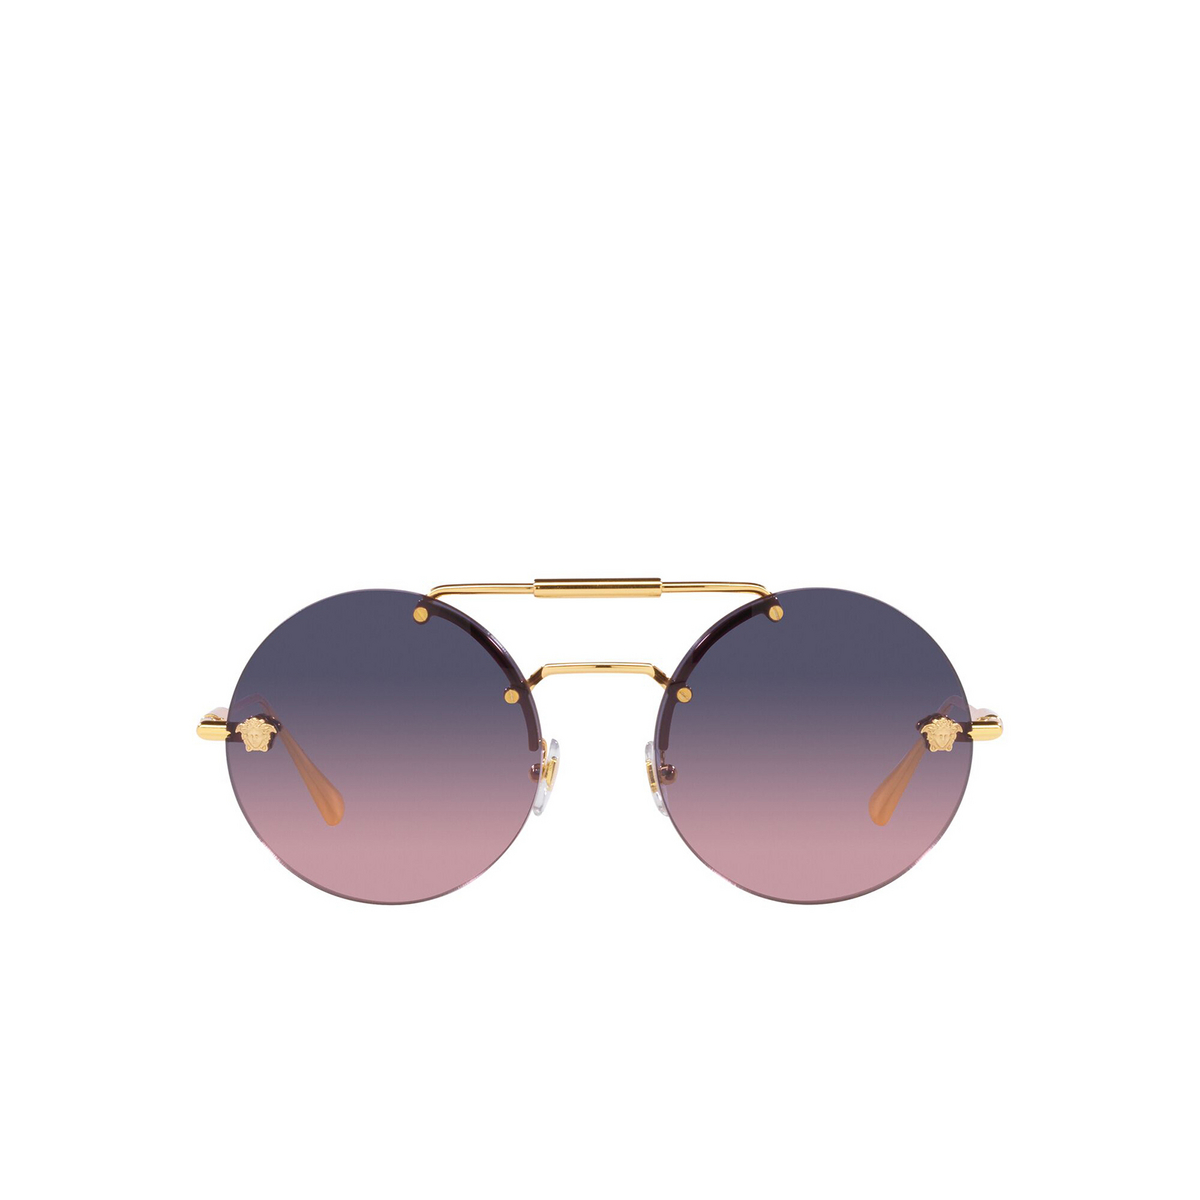 Versace® Round Sunglasses: VE2244 color Gold 1002I6 - front view.